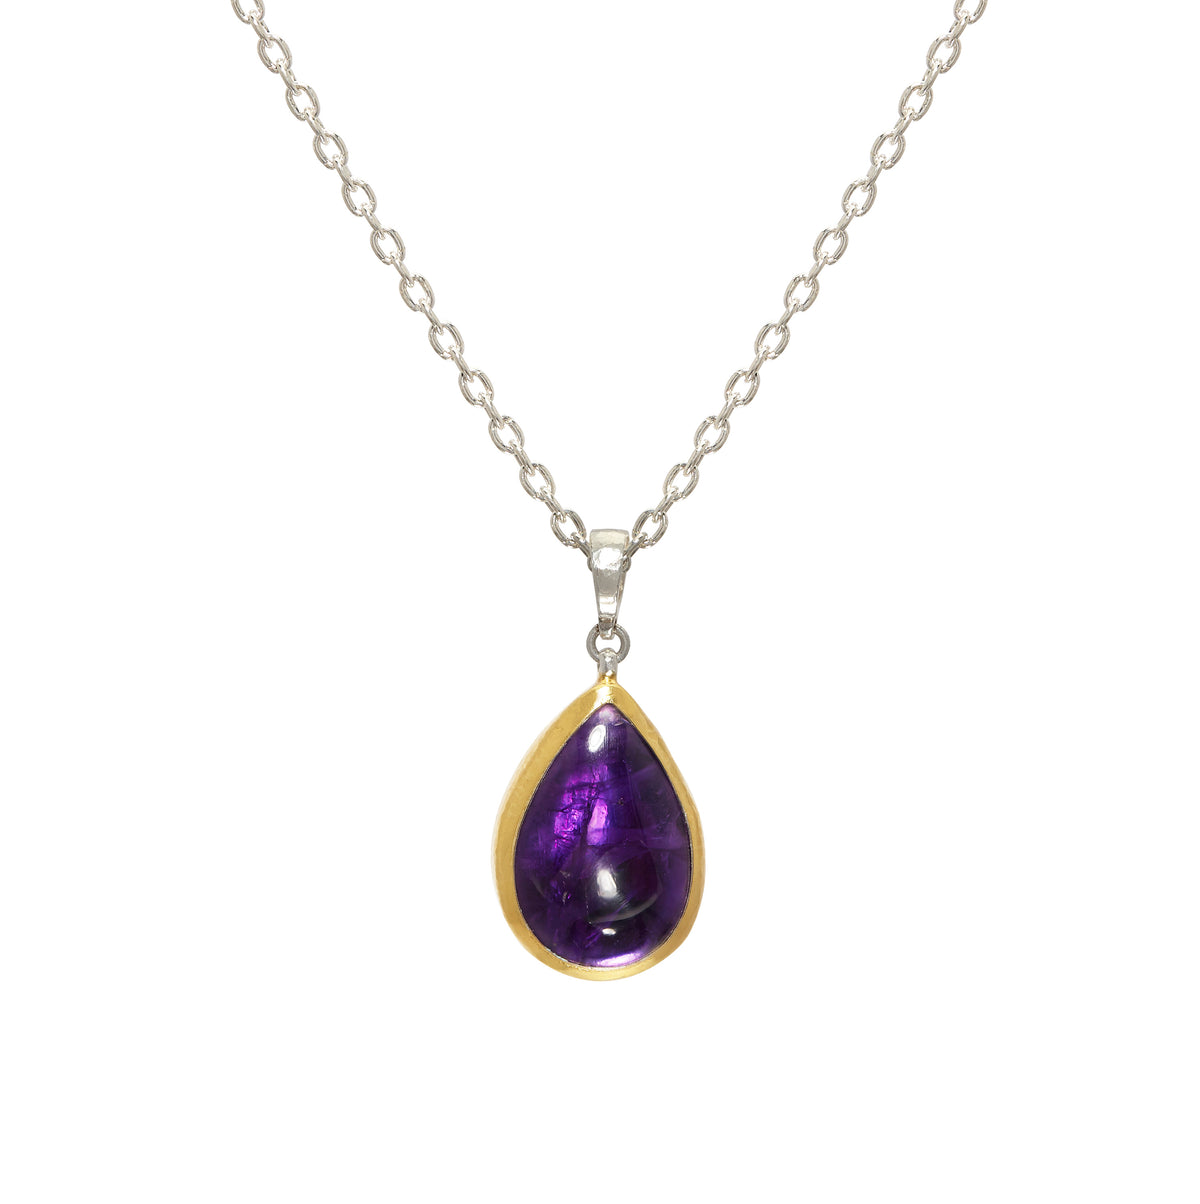 GURHAN, GURHAN Galapagos Sterling Silver Teardrop Pendant Necklace, Amethyst, Gold Accents